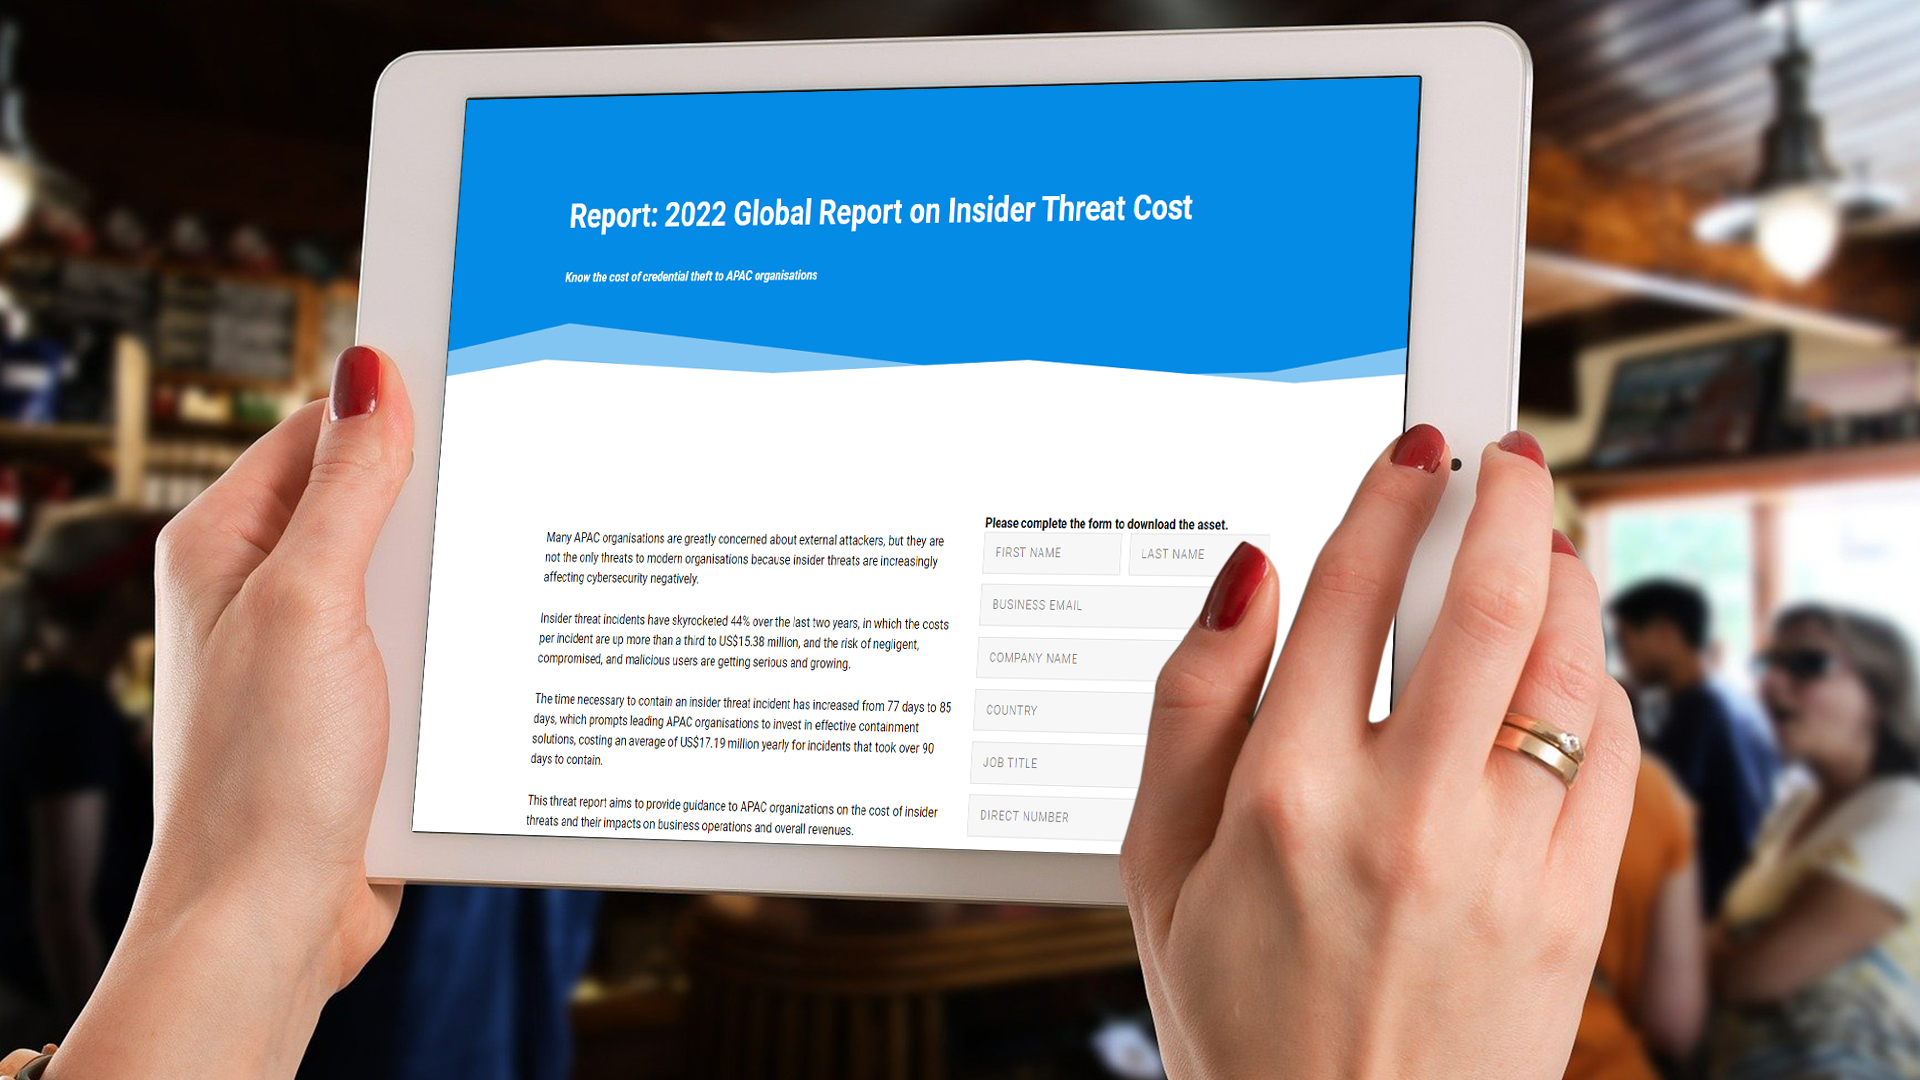 2022 Global Report on Insider Threat Cost